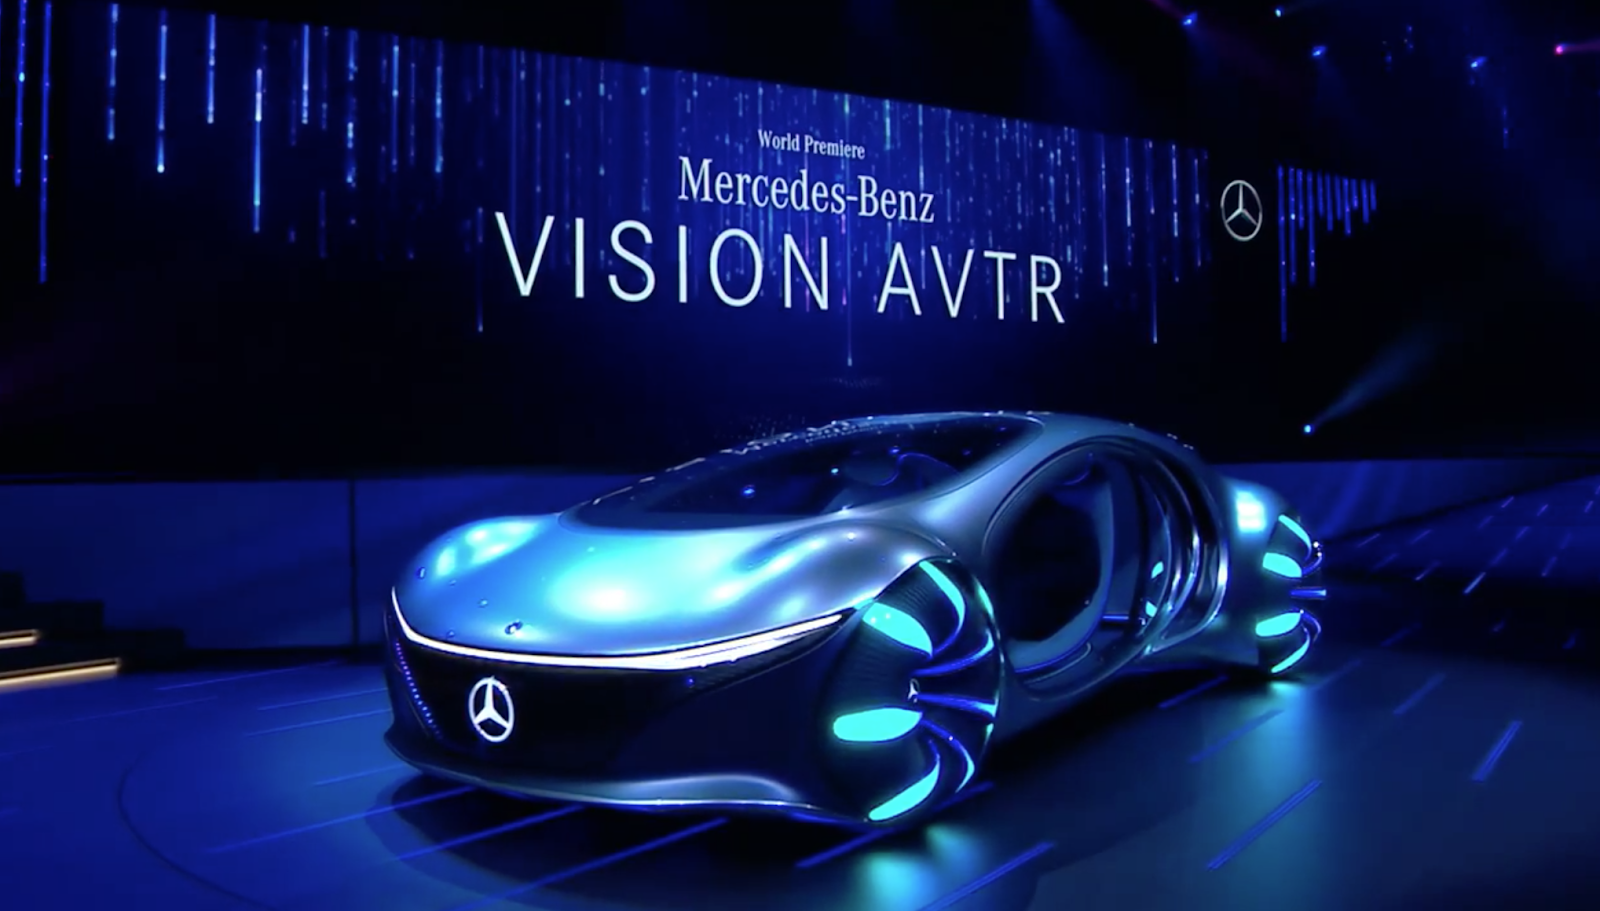 Drive like its 2154 What its like to take the space joystick of the wild  Mercedes Avatar concept car  Autoblog